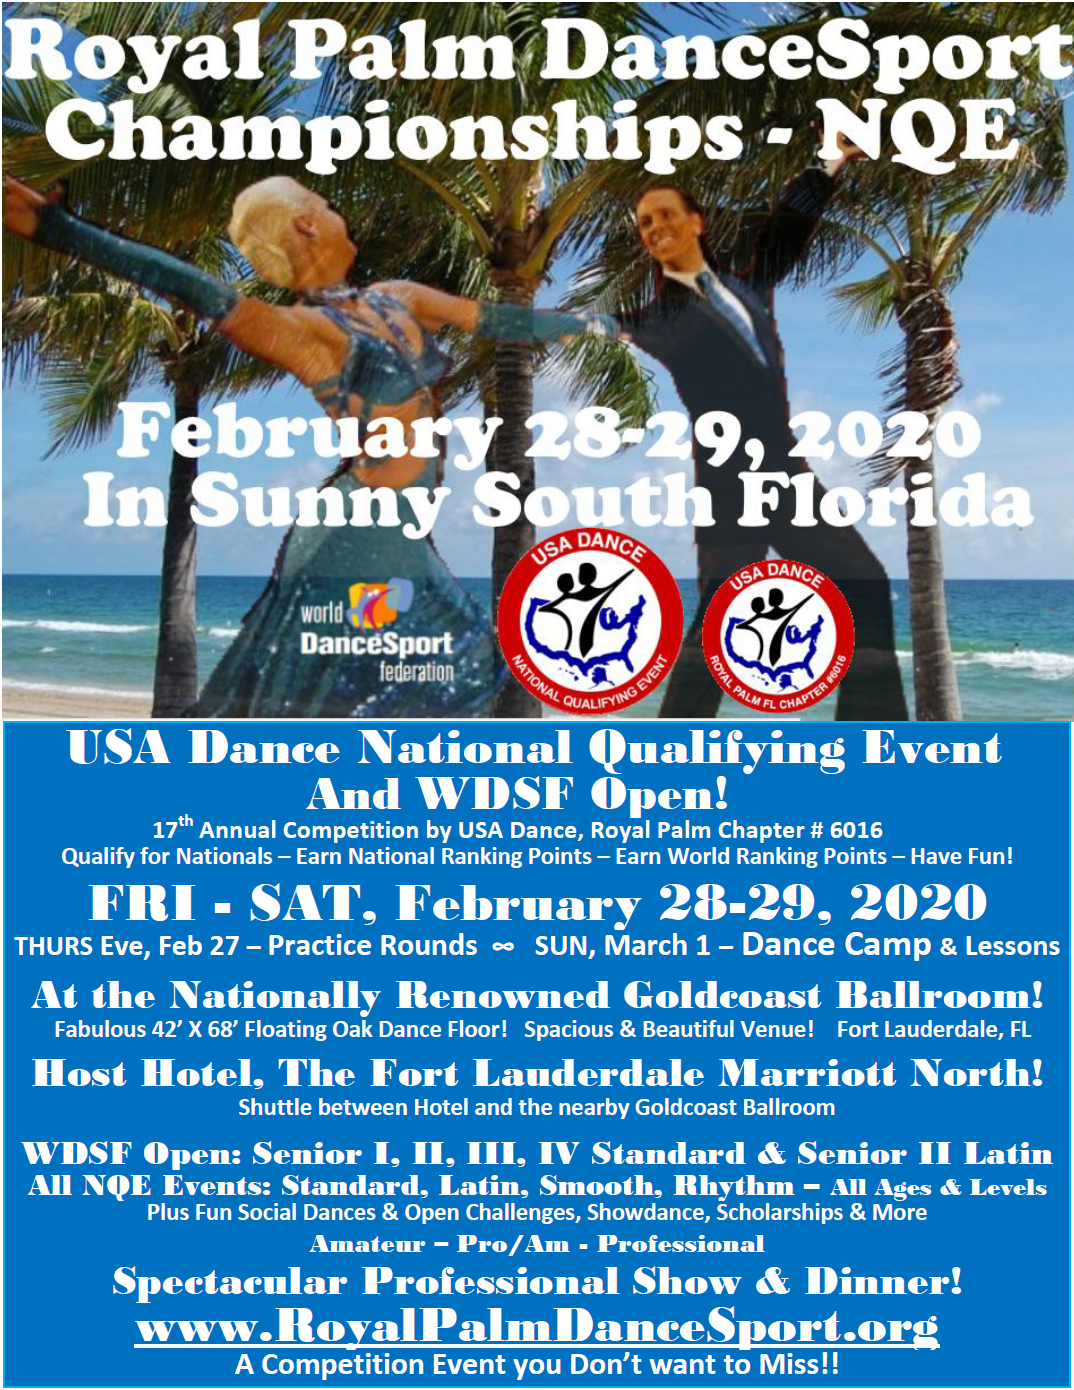 Royal Palm DanceSport Championships NQE & WDSF Open - February 28-29, 2020 - A Competition Event you Don't want to Miss!!